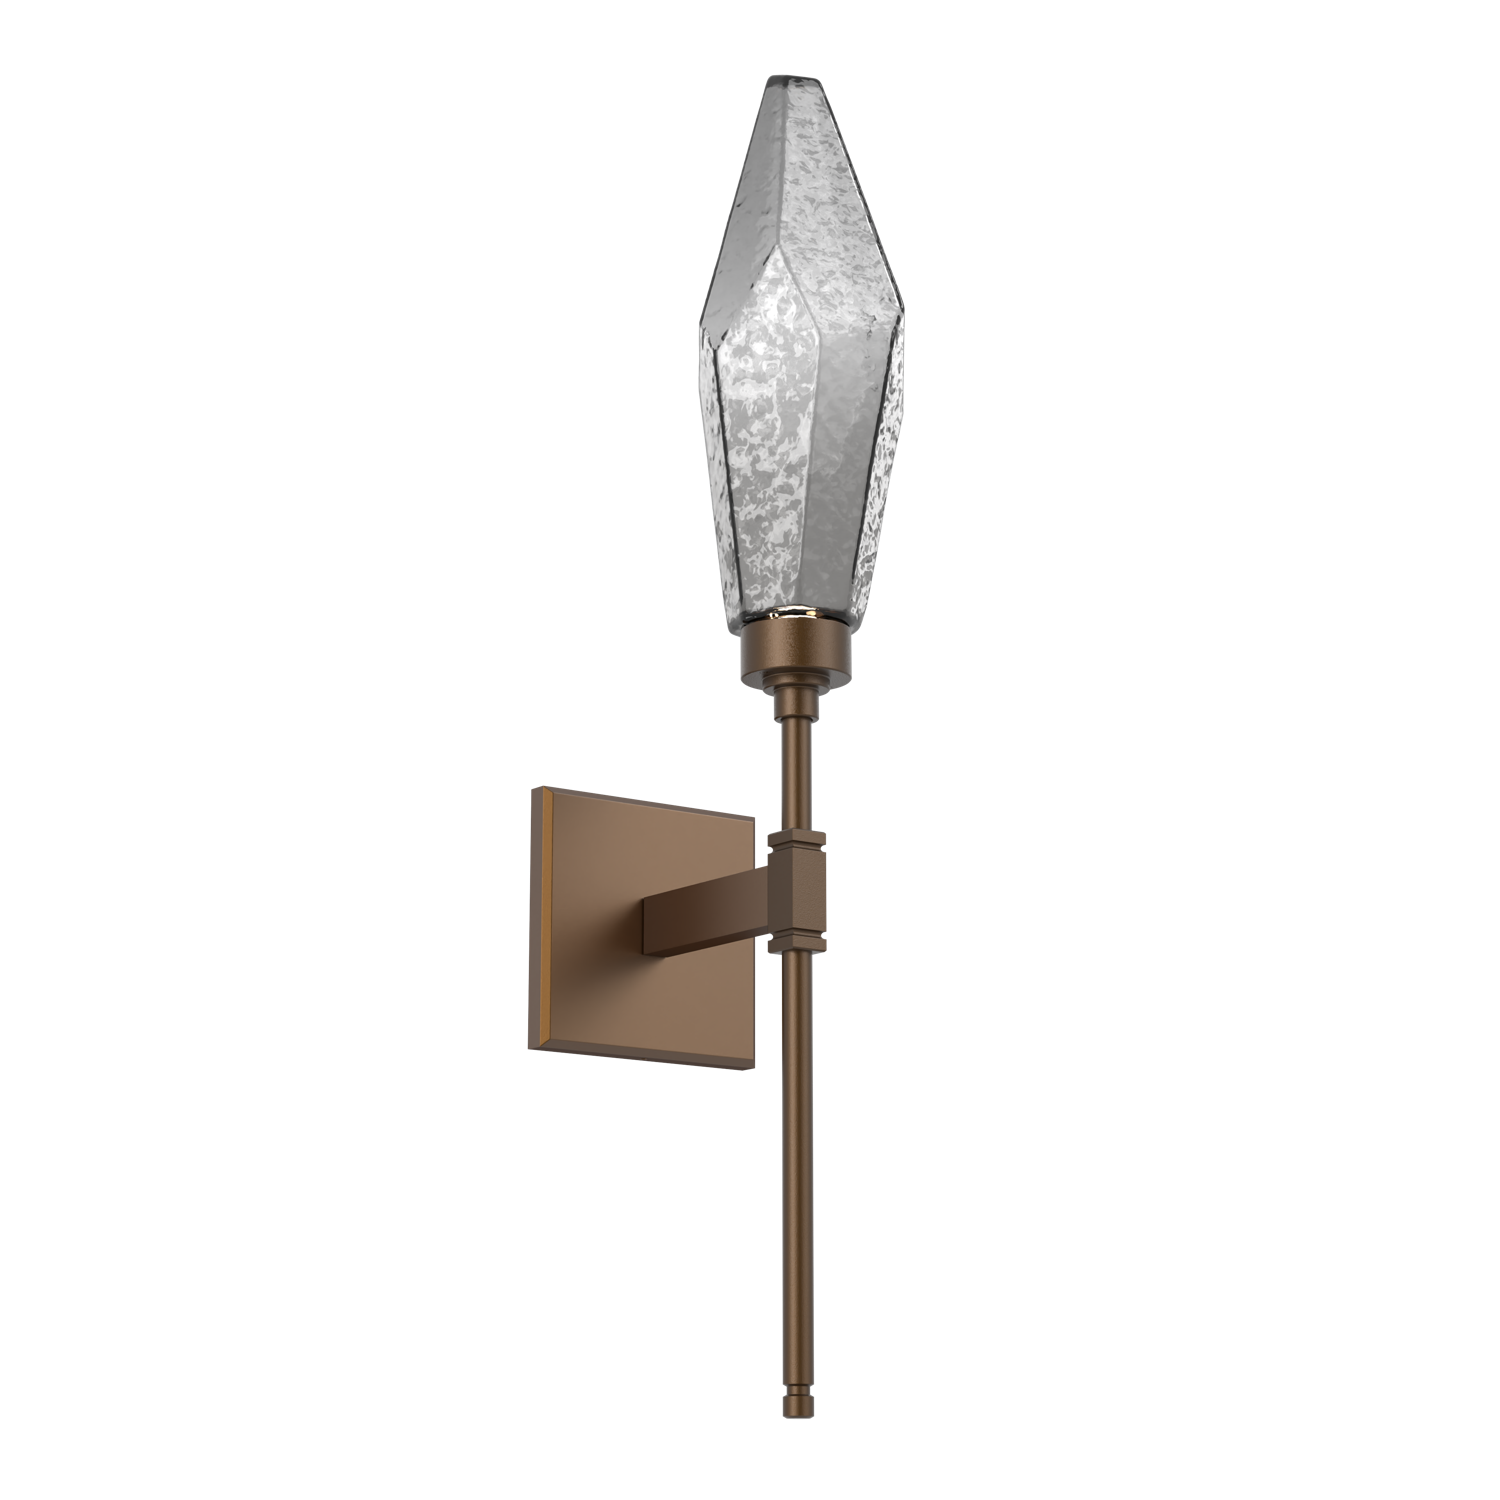 IDB0050-07-FB-CS-Hammerton-Studio-Rock-Crystal-belvedere-wall-sconce-with-flat-bronze-finish-and-chilled-smoke-glass-shades-and-LED-lamping